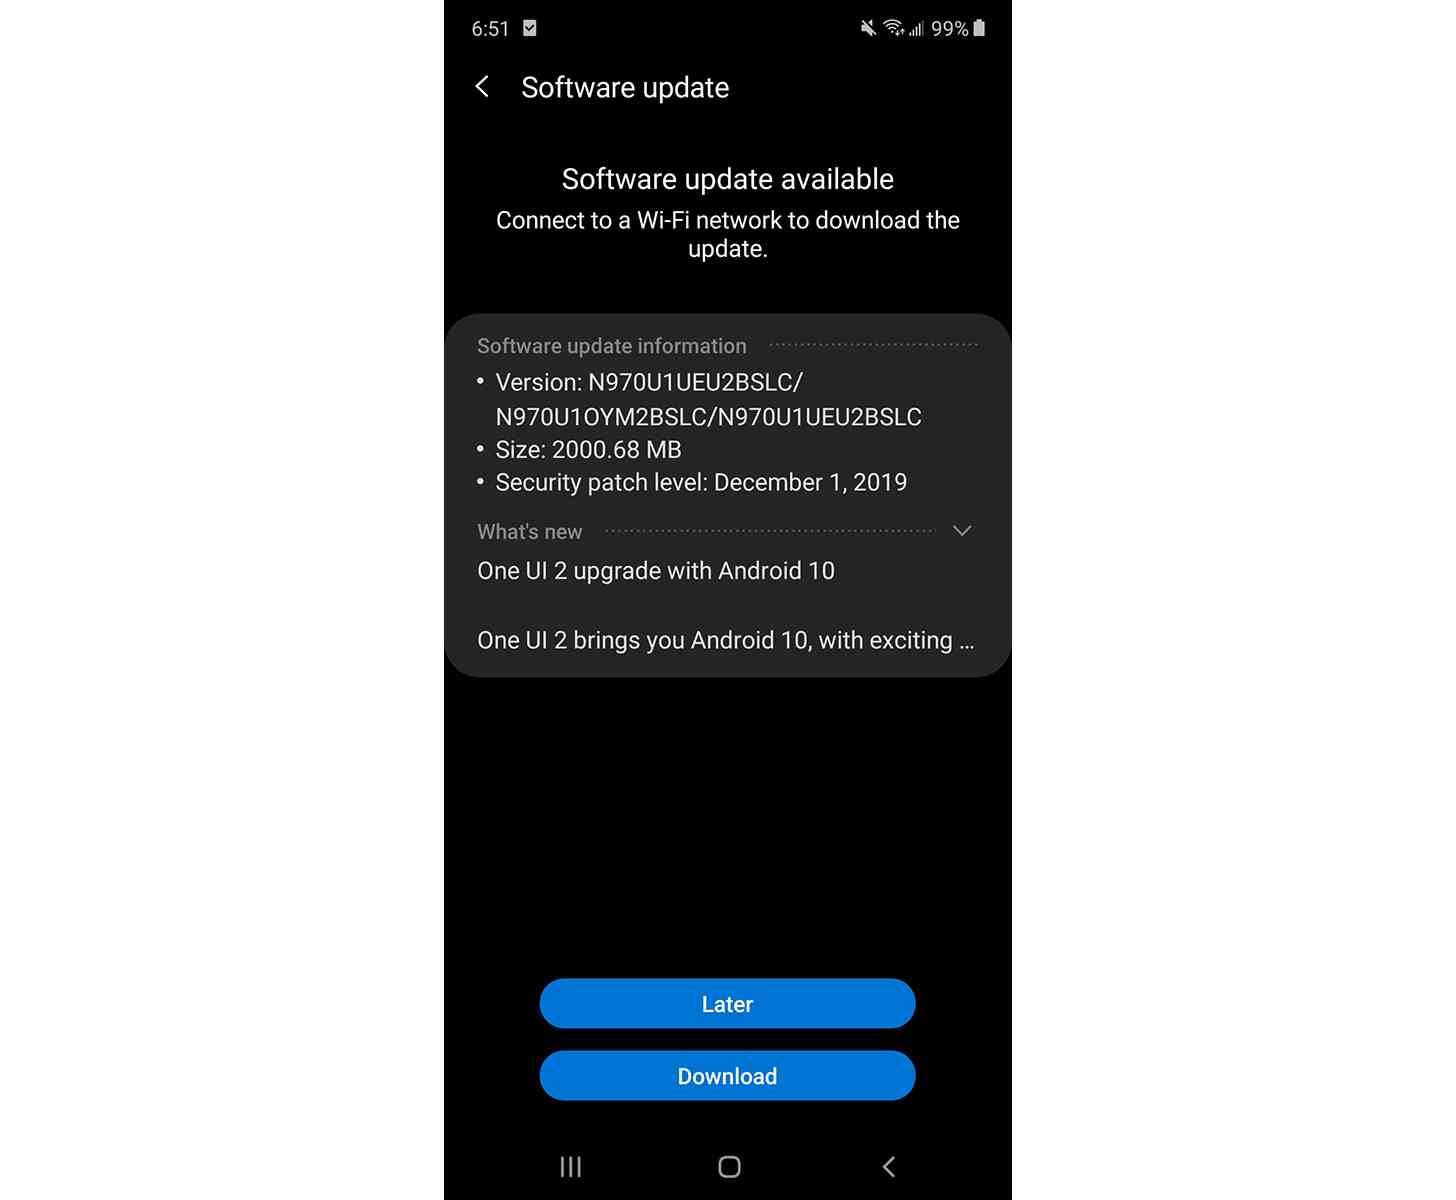 Galaxy Note 10 Android 10 update unlocked